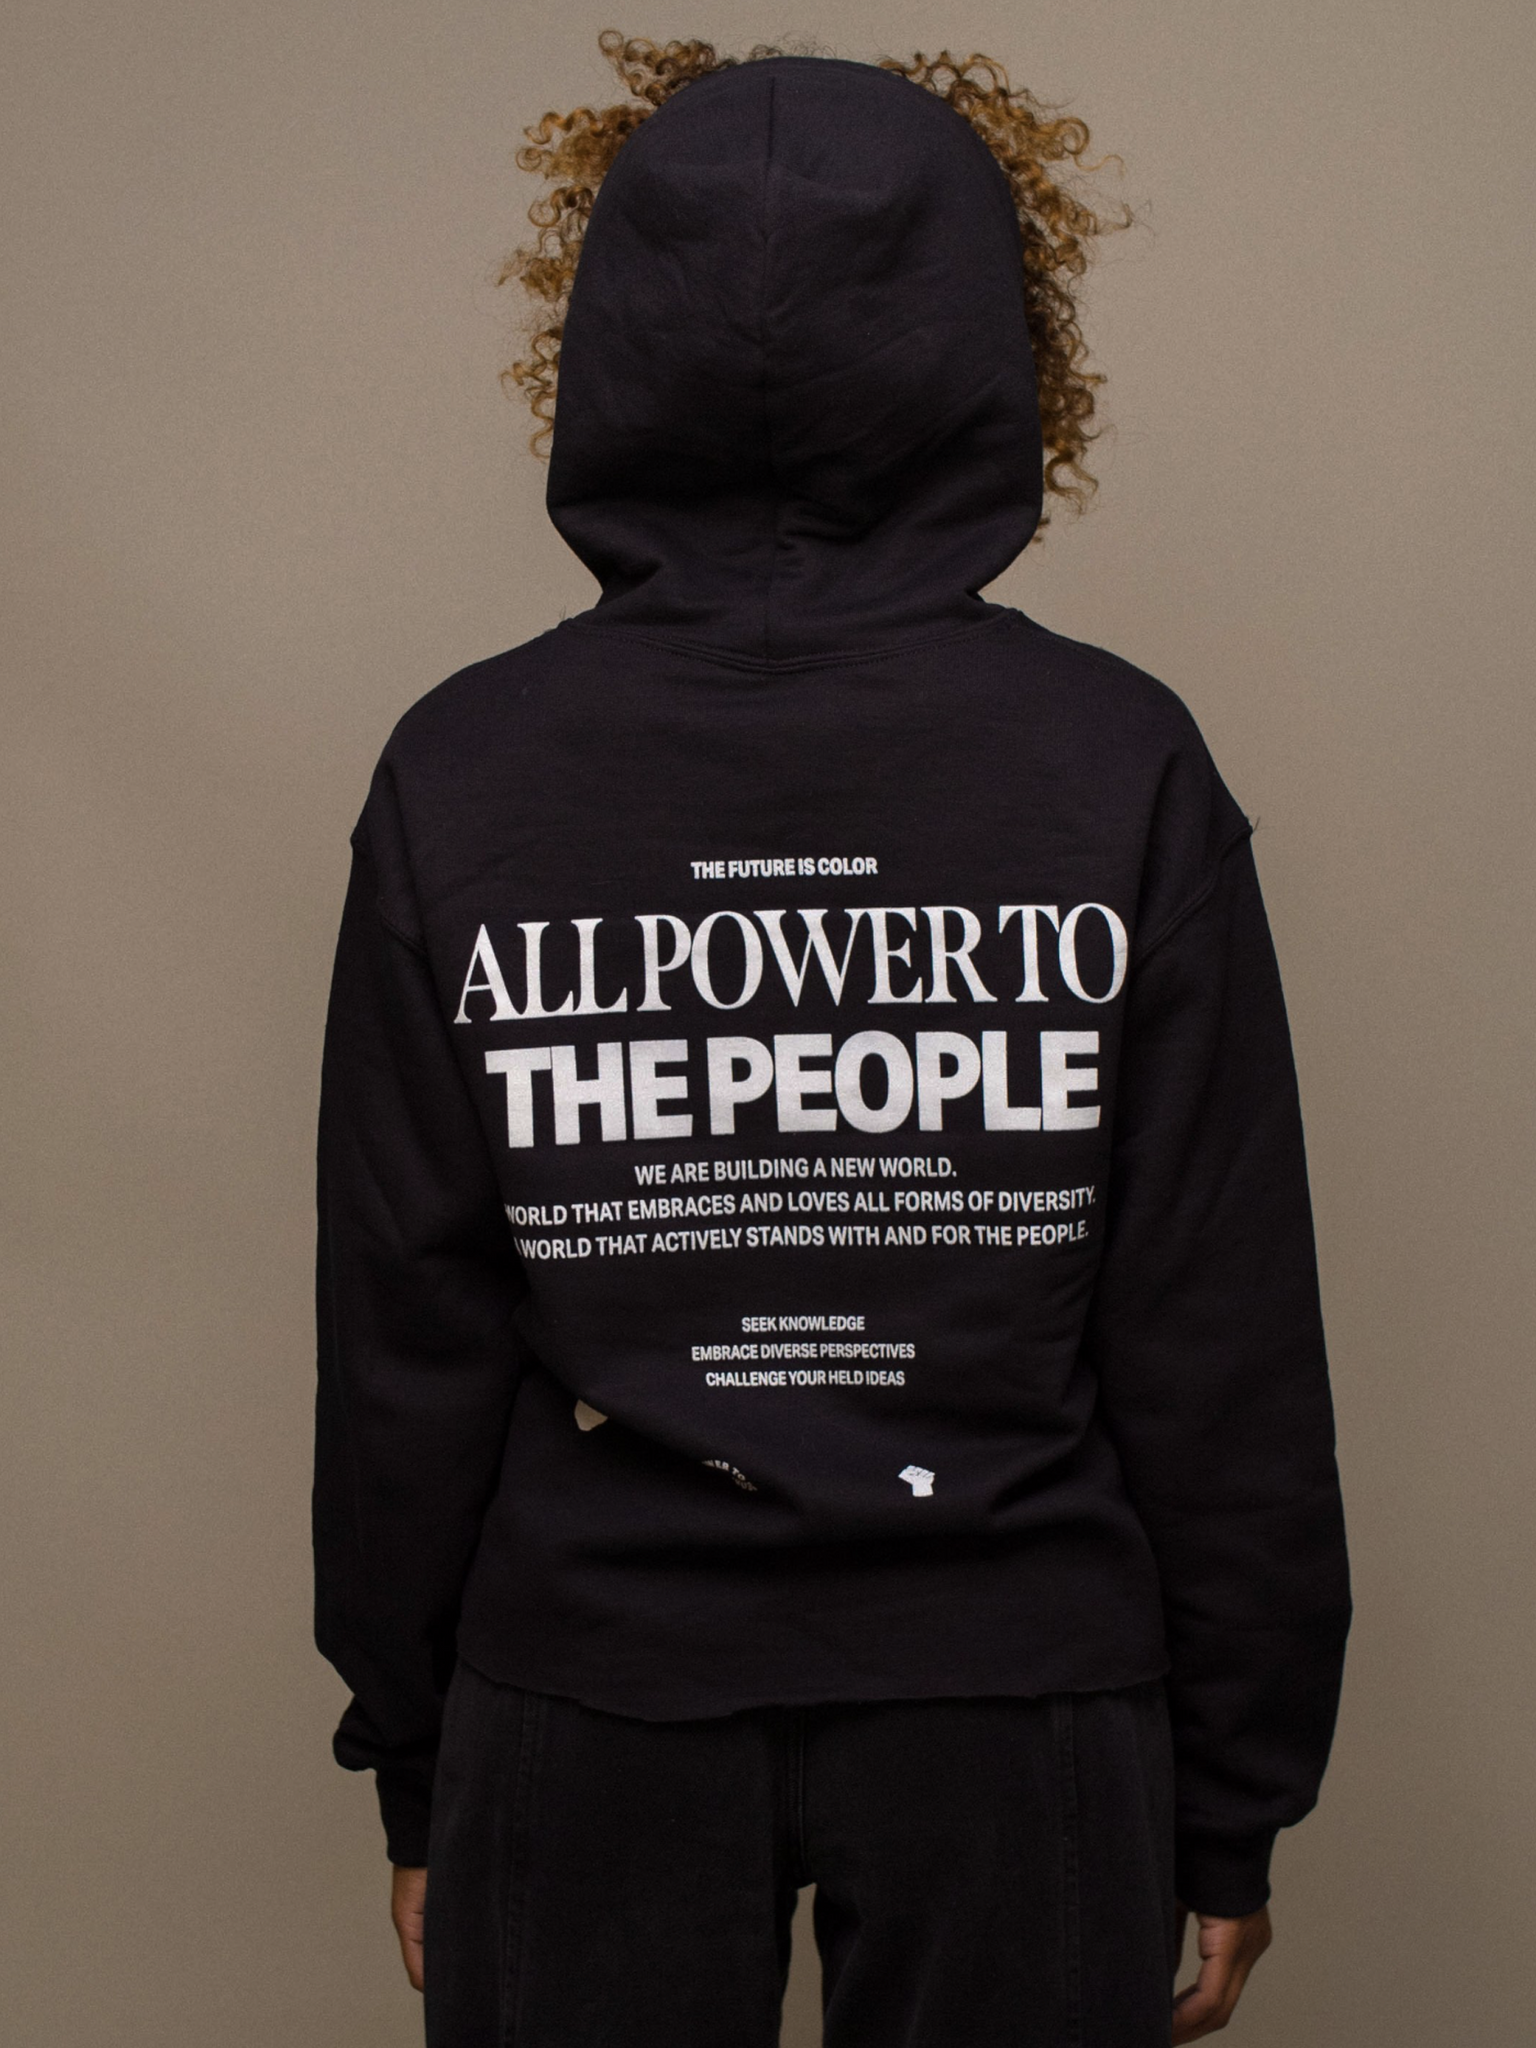 All power to the people hoodie